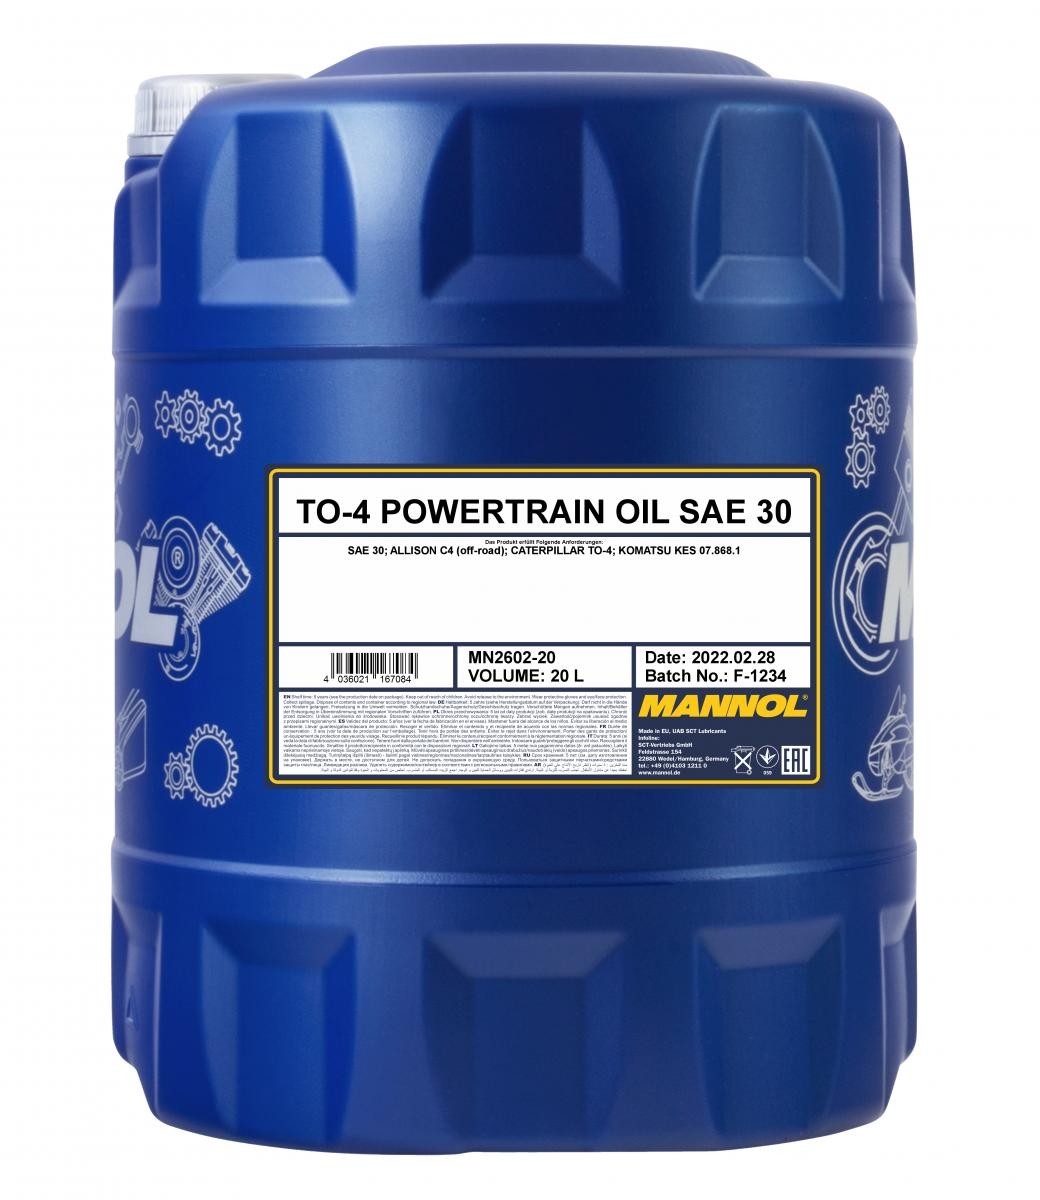 MANNOL TO-4 Powertrain MN2602-20 Transmission fluid SAE 30, Mineral Oil, Capacity: 20l